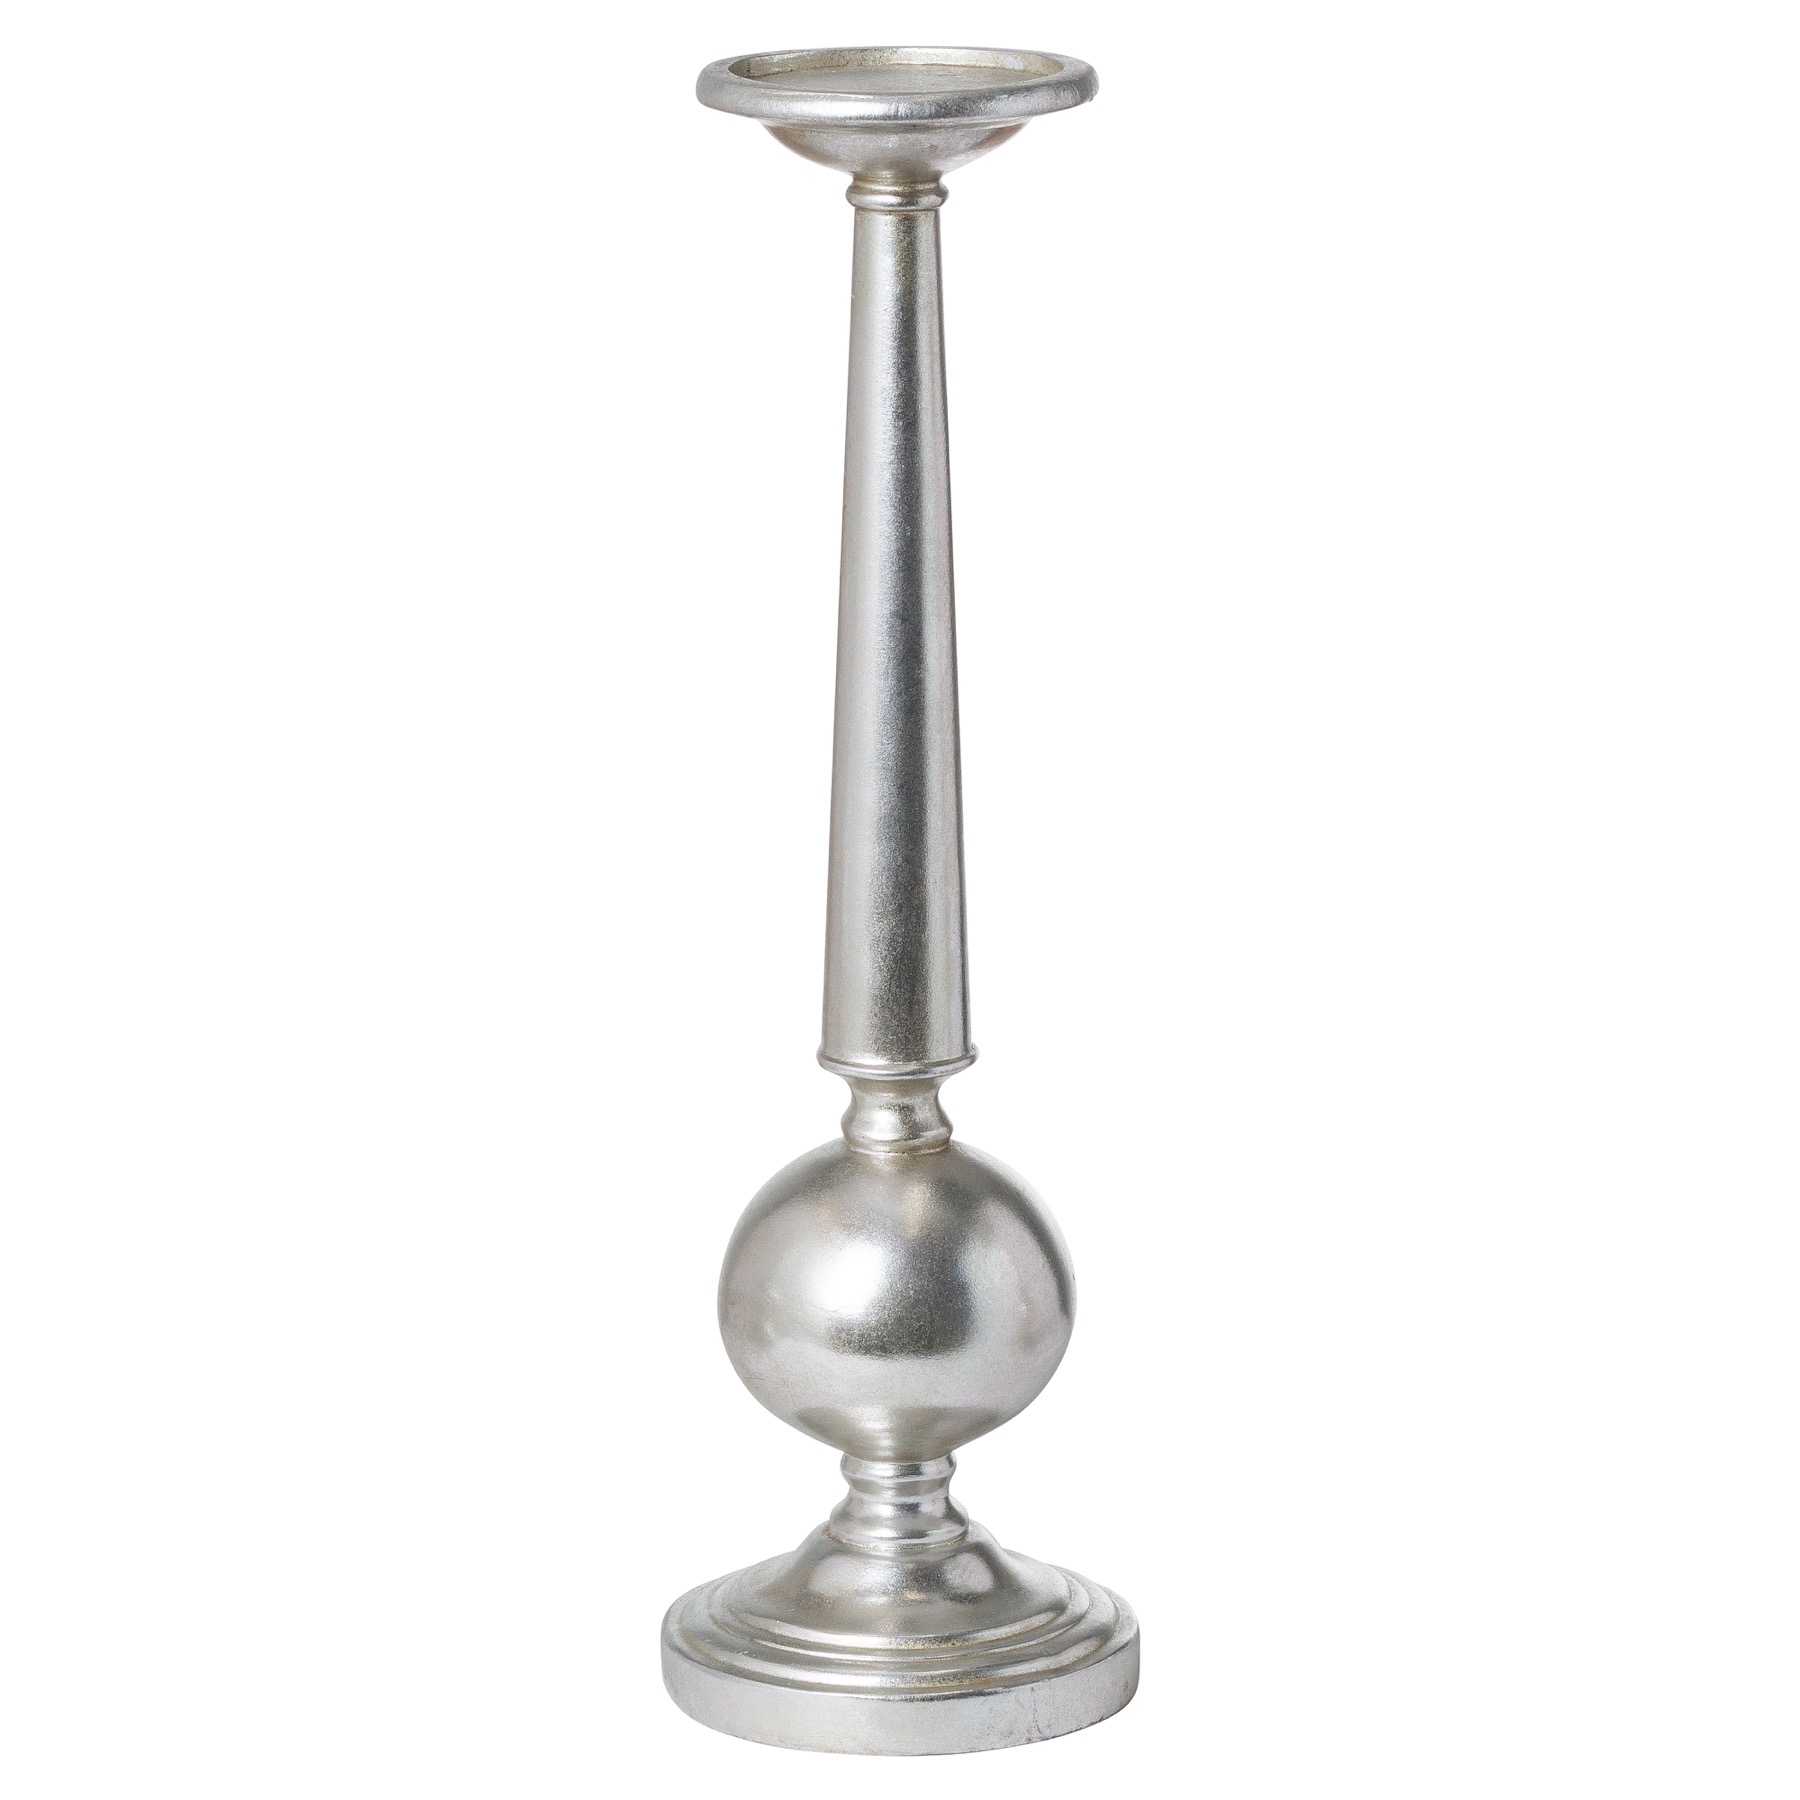 Antique Silver Medium Column Candle Stand - Image 1